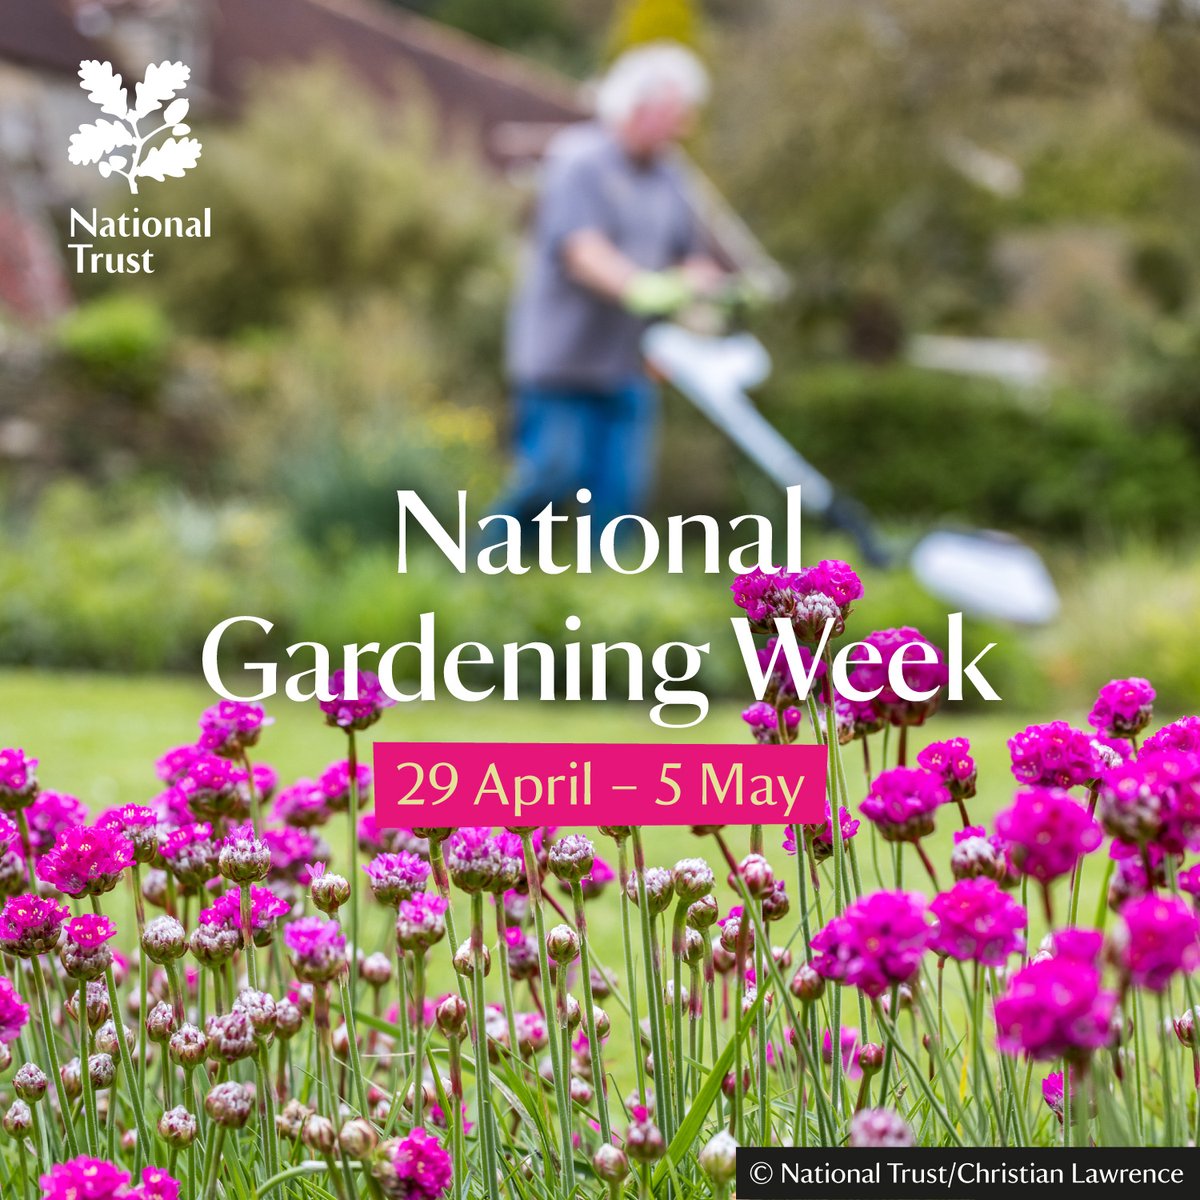 Our volunteers at Mottistone work hard to keep the gardens looking beautiful. This #NationalGardeningWeek, why not pay a visit and discover the gardens for yourself? We're open every day from 10.30am-5pm. Plan a visit at bit.ly/MottistoneGard… #MottistoneGardens #NationalTrust